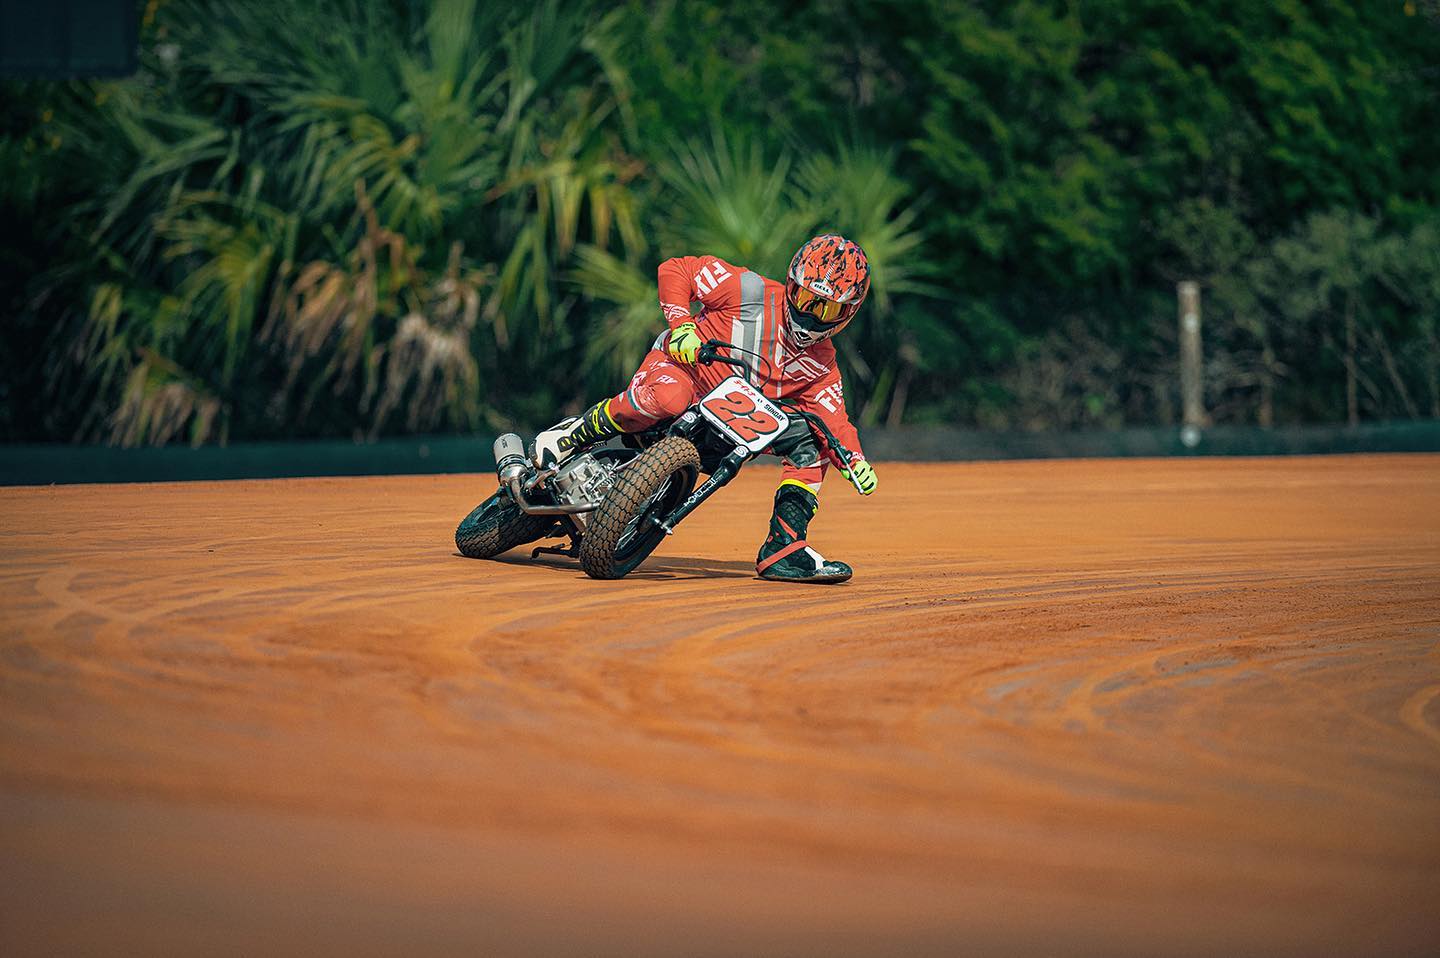 Sliding with our S187 🙌✊️
—
#sundaymotors #flattrack #ycf #moto #motorcycle